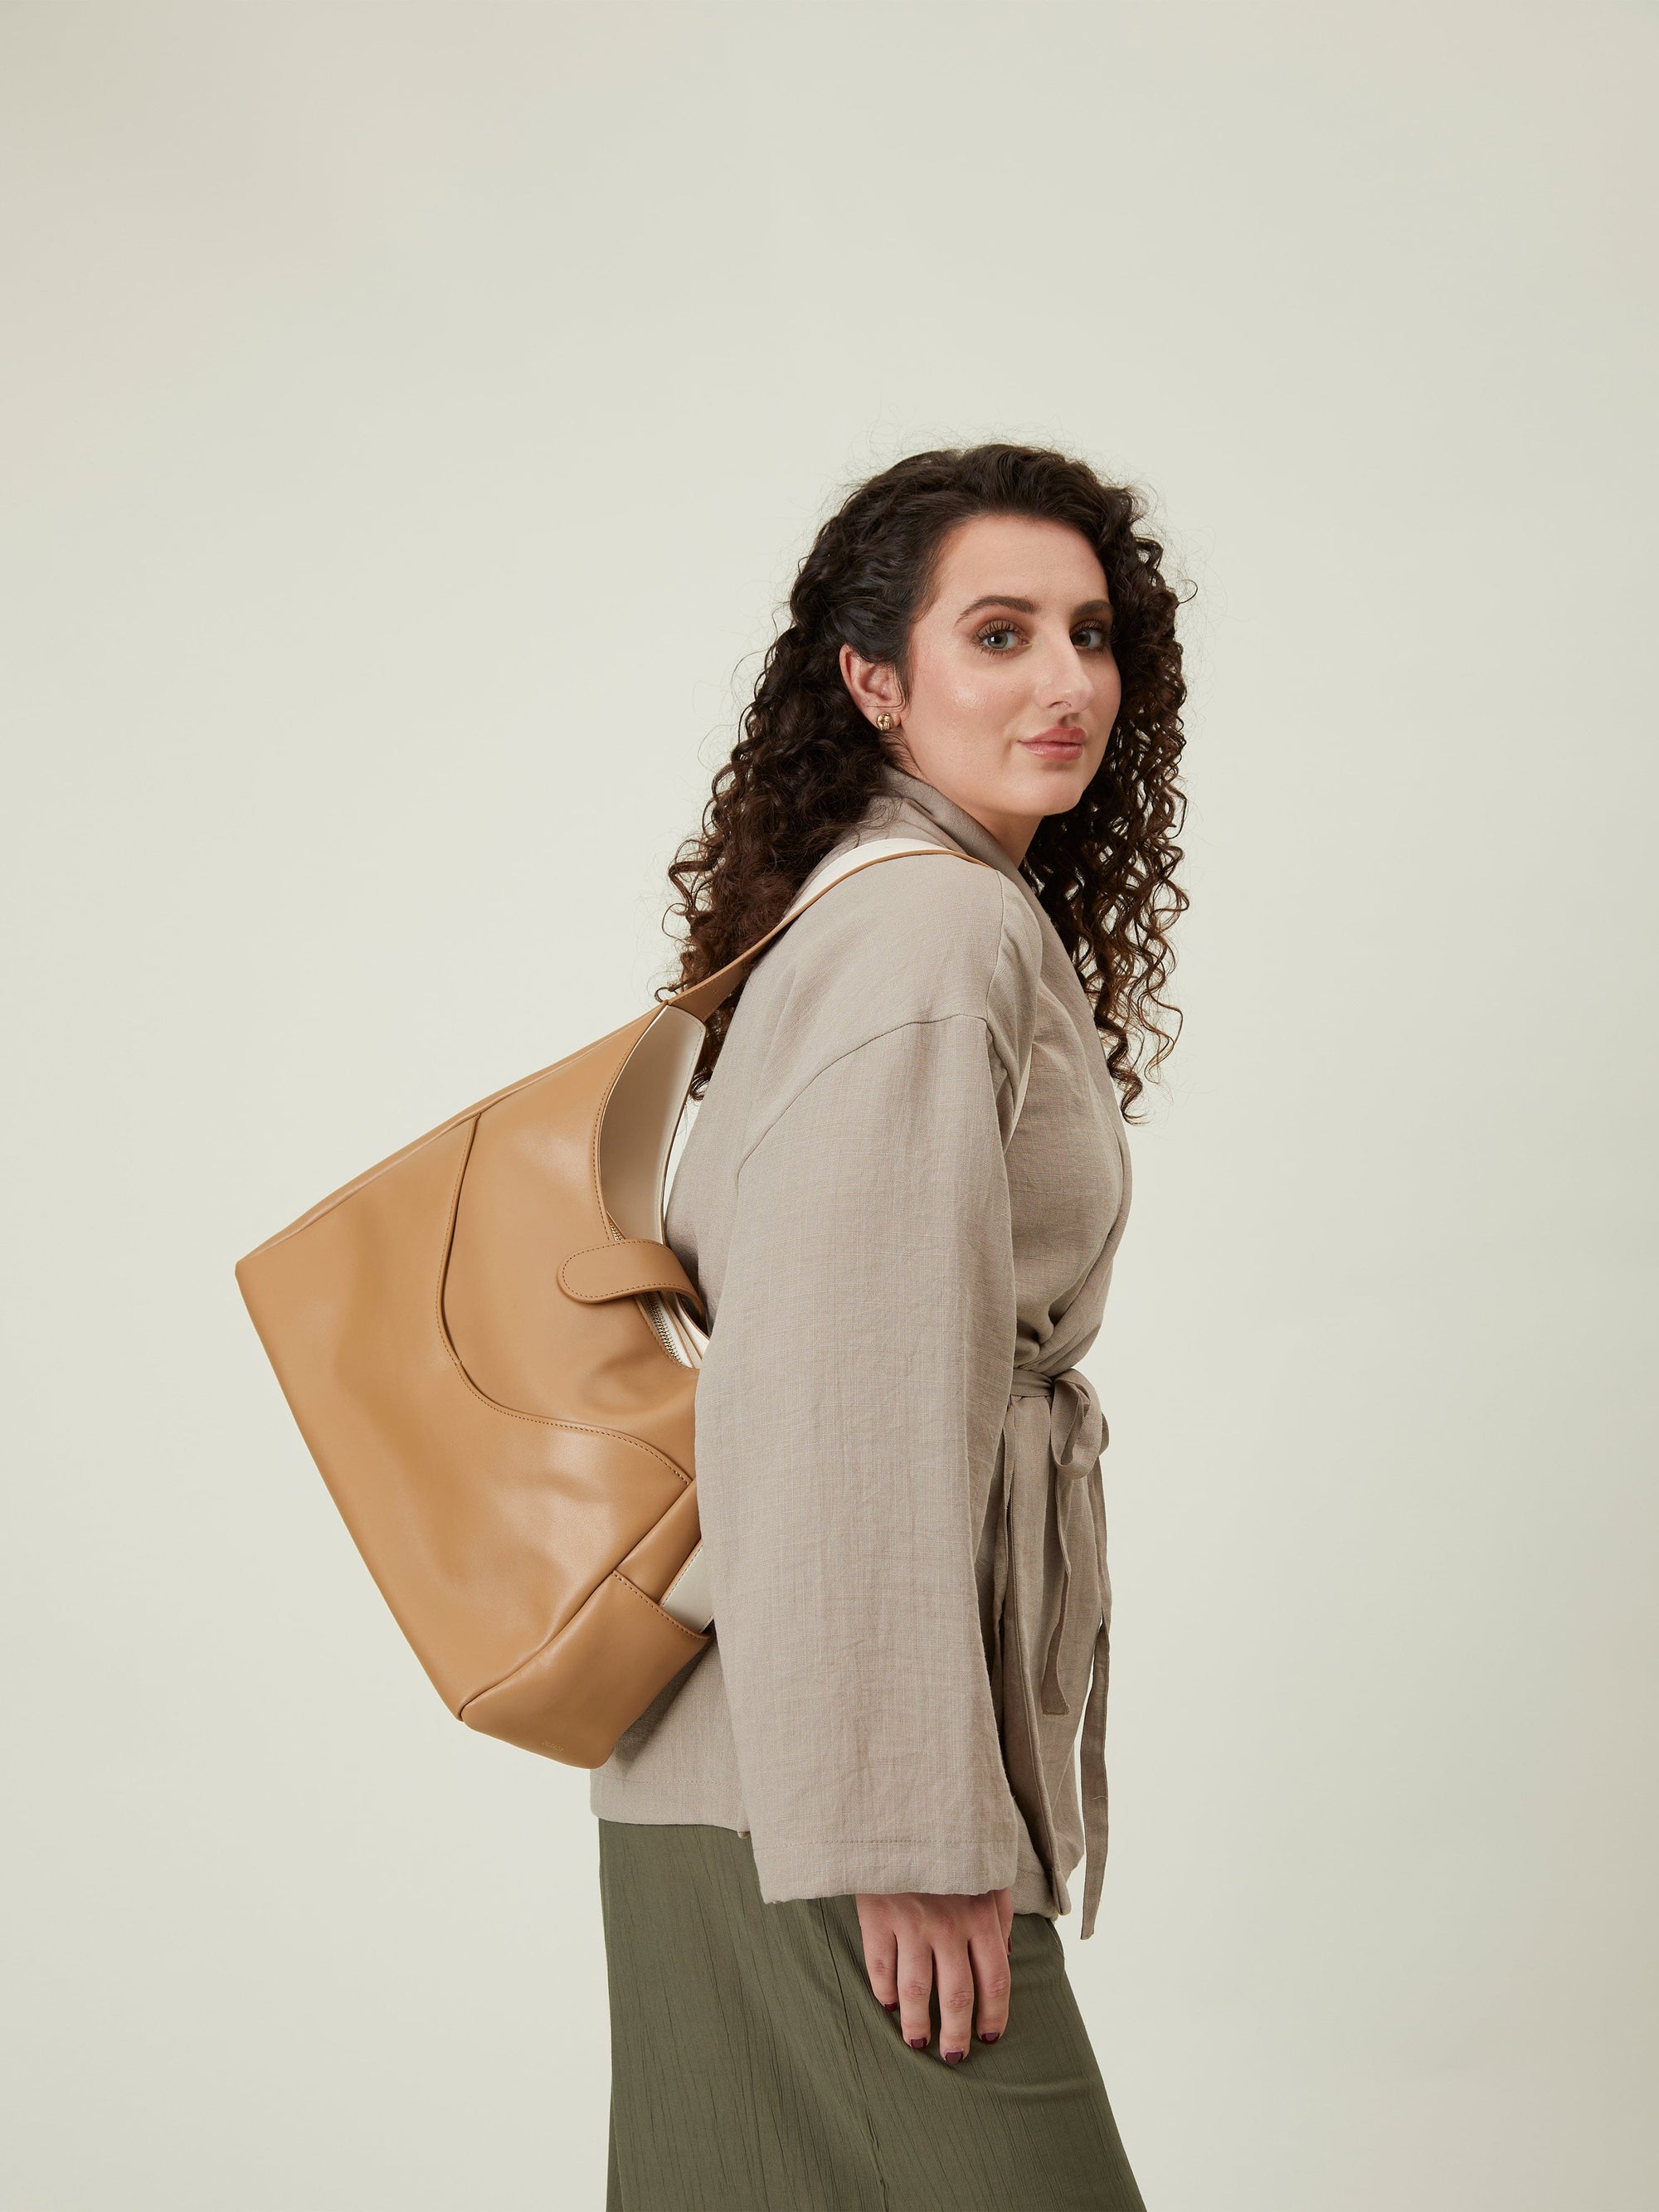 OLEADA Mini Hobo Bag > Women Leather Bag For All Occasions > multiple interior and exterior pockets with a laptop compartment > 13 inch laptop bag > convertible to shoulder bag Reverie Hobo Toffee